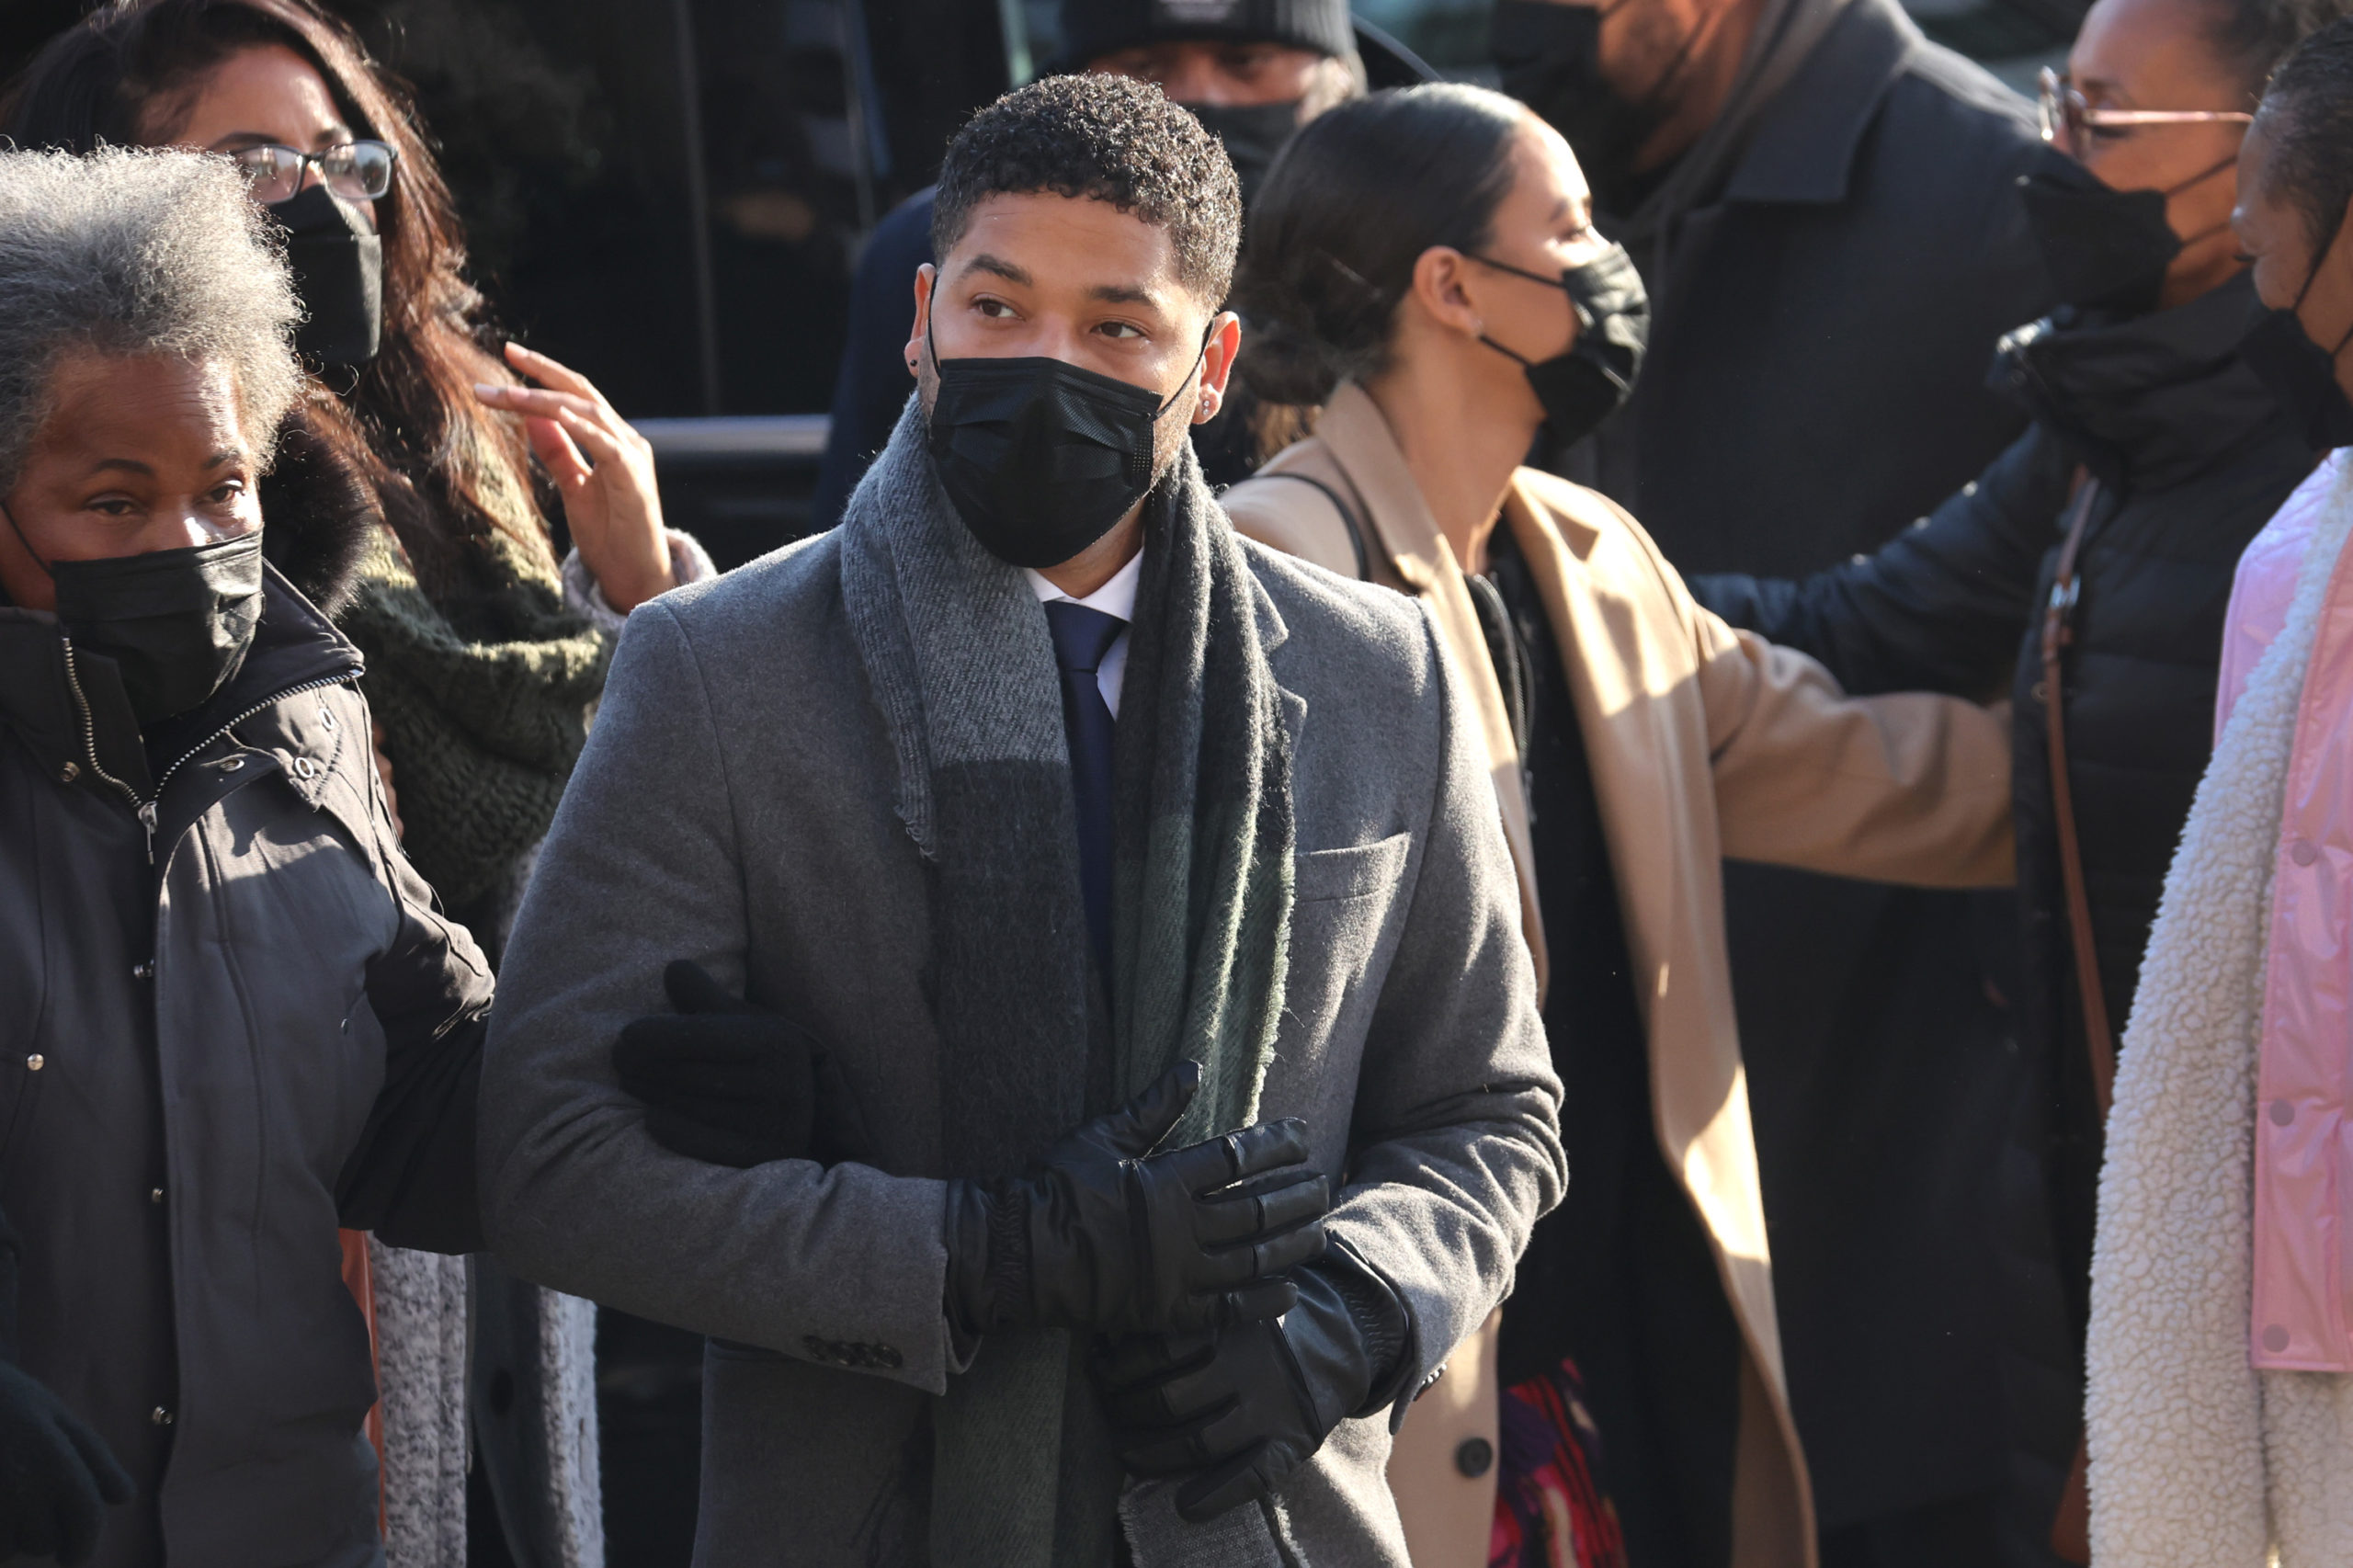 CHICAGO, ILLINOIS - DECEMBER 08: Former "Empire" actor Jussie Smollett arrives at the Leighton Criminal Courts Building for day seven of his trial on December 8, 2021 in Chicago, Illinois. Smollett is accused of lying to police when he reported that two masked men physically attacked him, yelling racist and anti-gay remarks near his Chicago home in 2019. (Photo by Scott Olson/Getty Images)